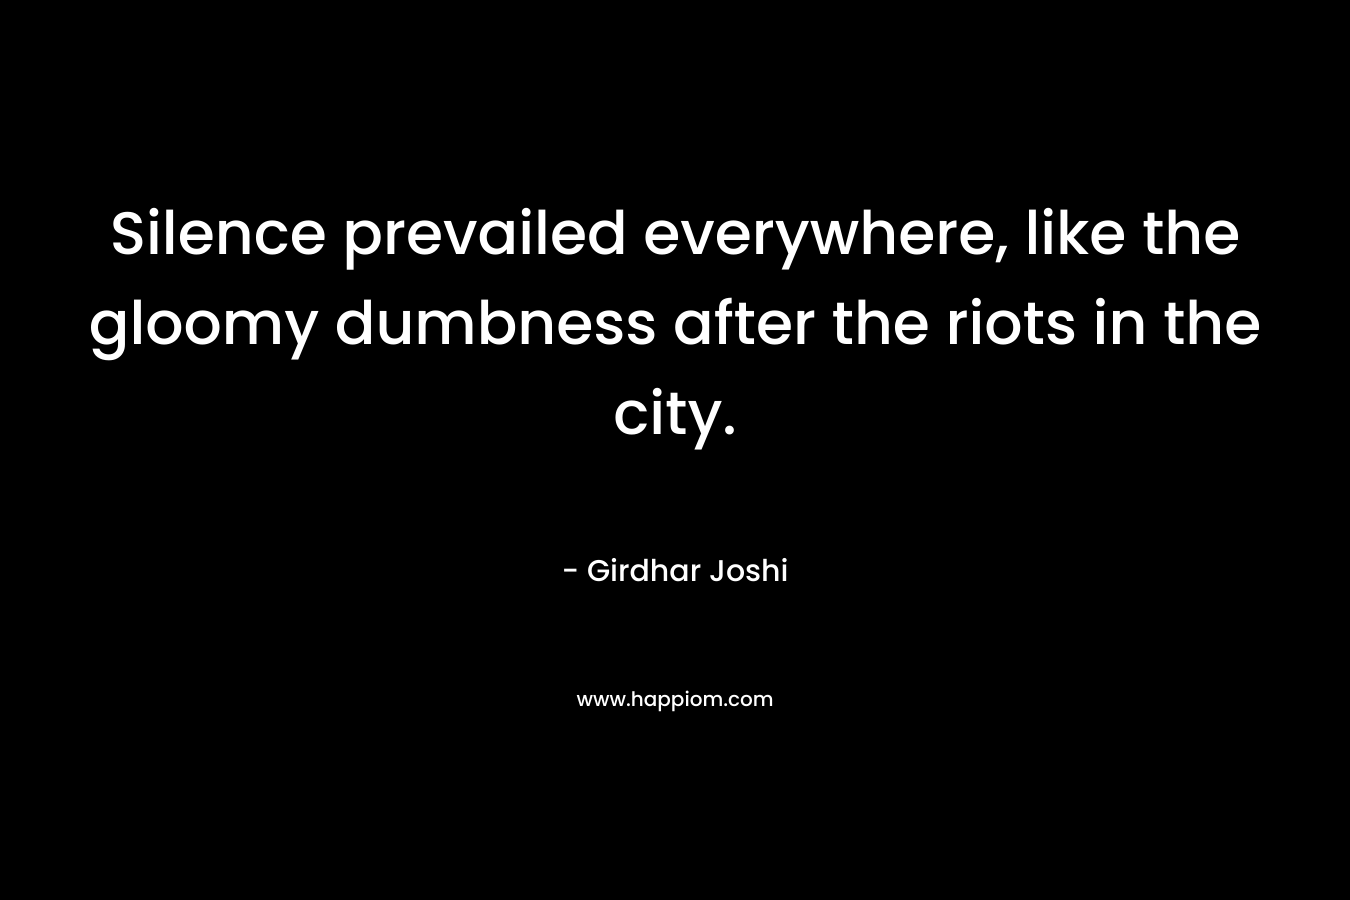 Silence prevailed everywhere, like the gloomy dumbness after the riots in the city.